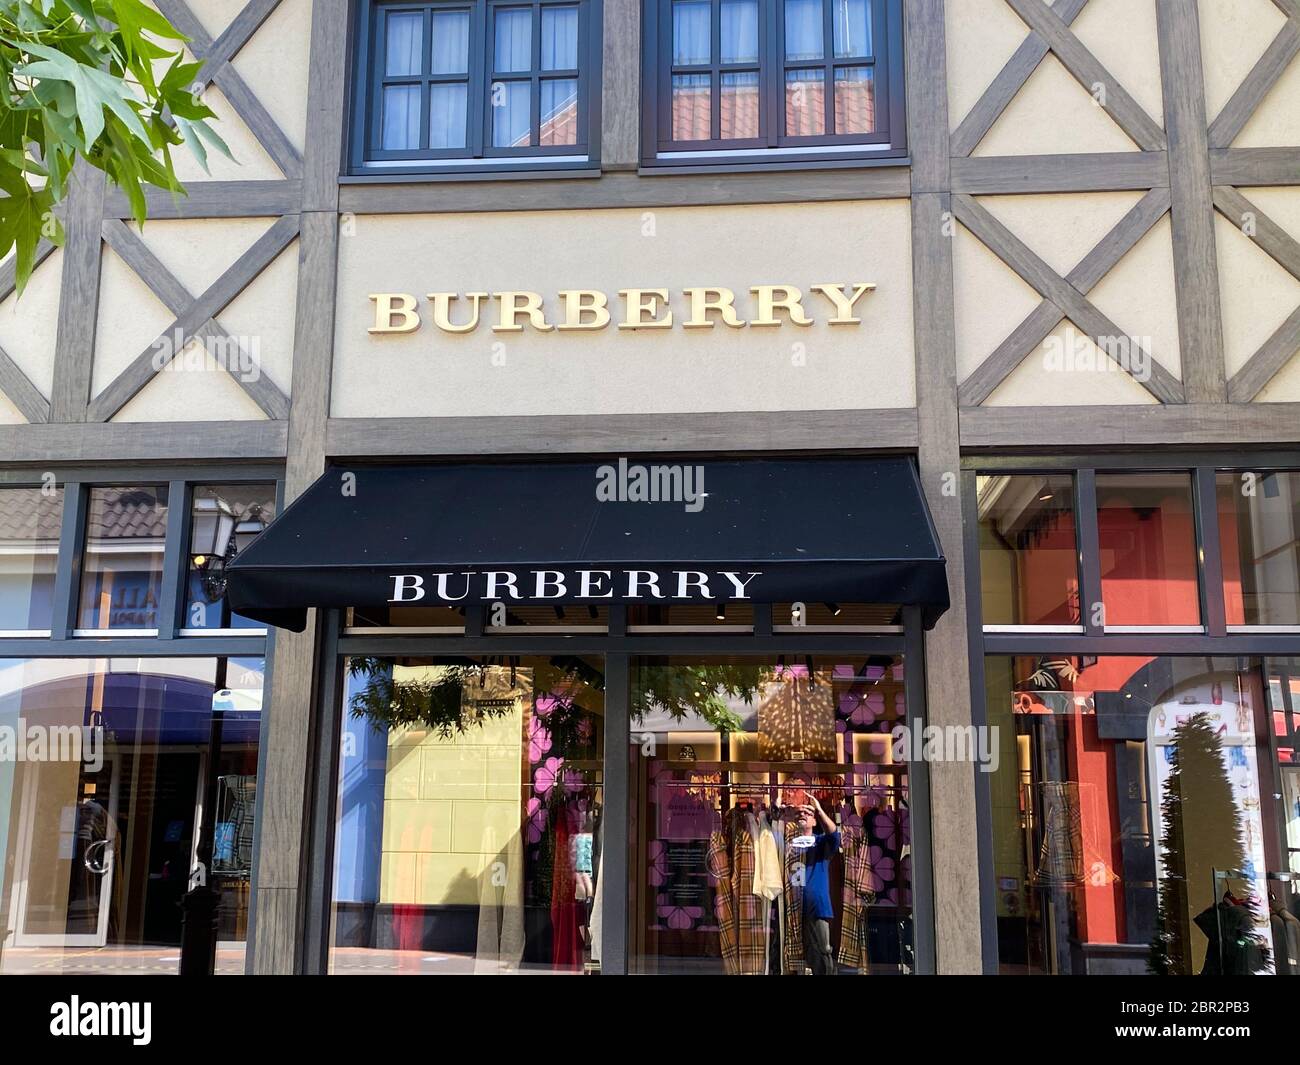 Roermond, Netherlands - May 19. 2020: View on facade with logo lettering of  Burberry fashion company at shop entrance Stock Photo - Alamy